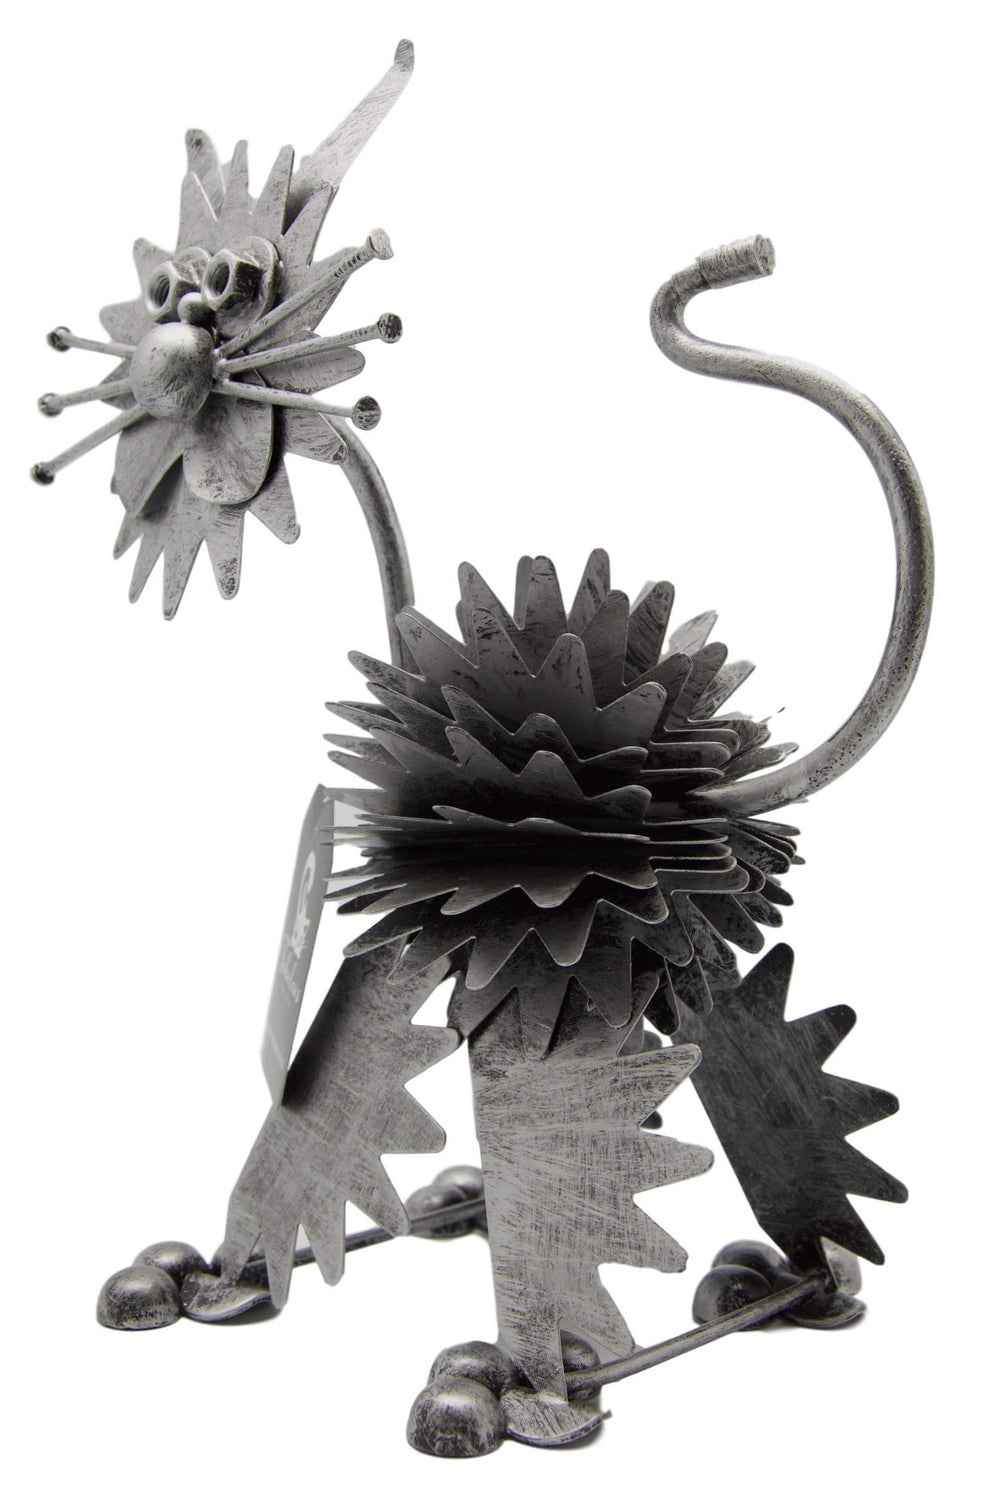 Nuts & Bolts Metal Cat Ornament and Matching Hooks - Gift Set